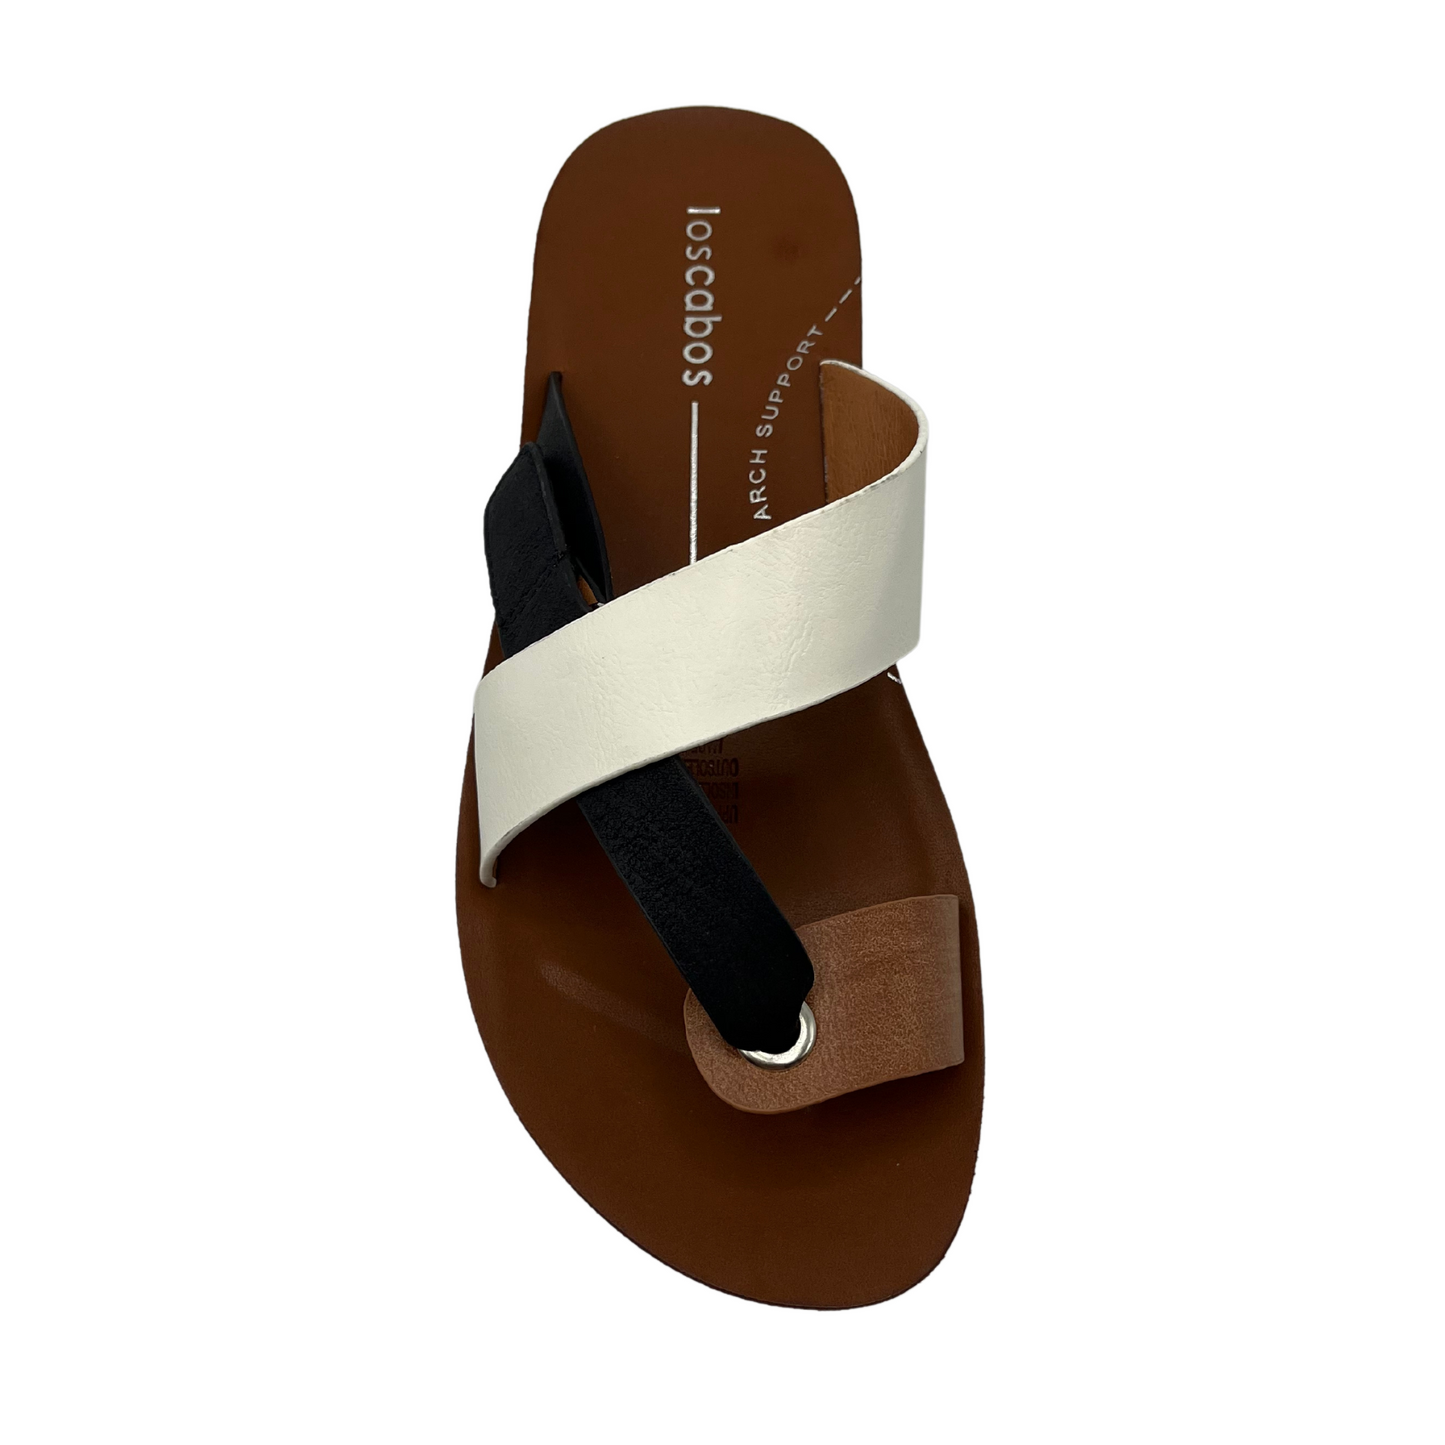 Top view of black and white strapped sandal with toe strap and velcro closure